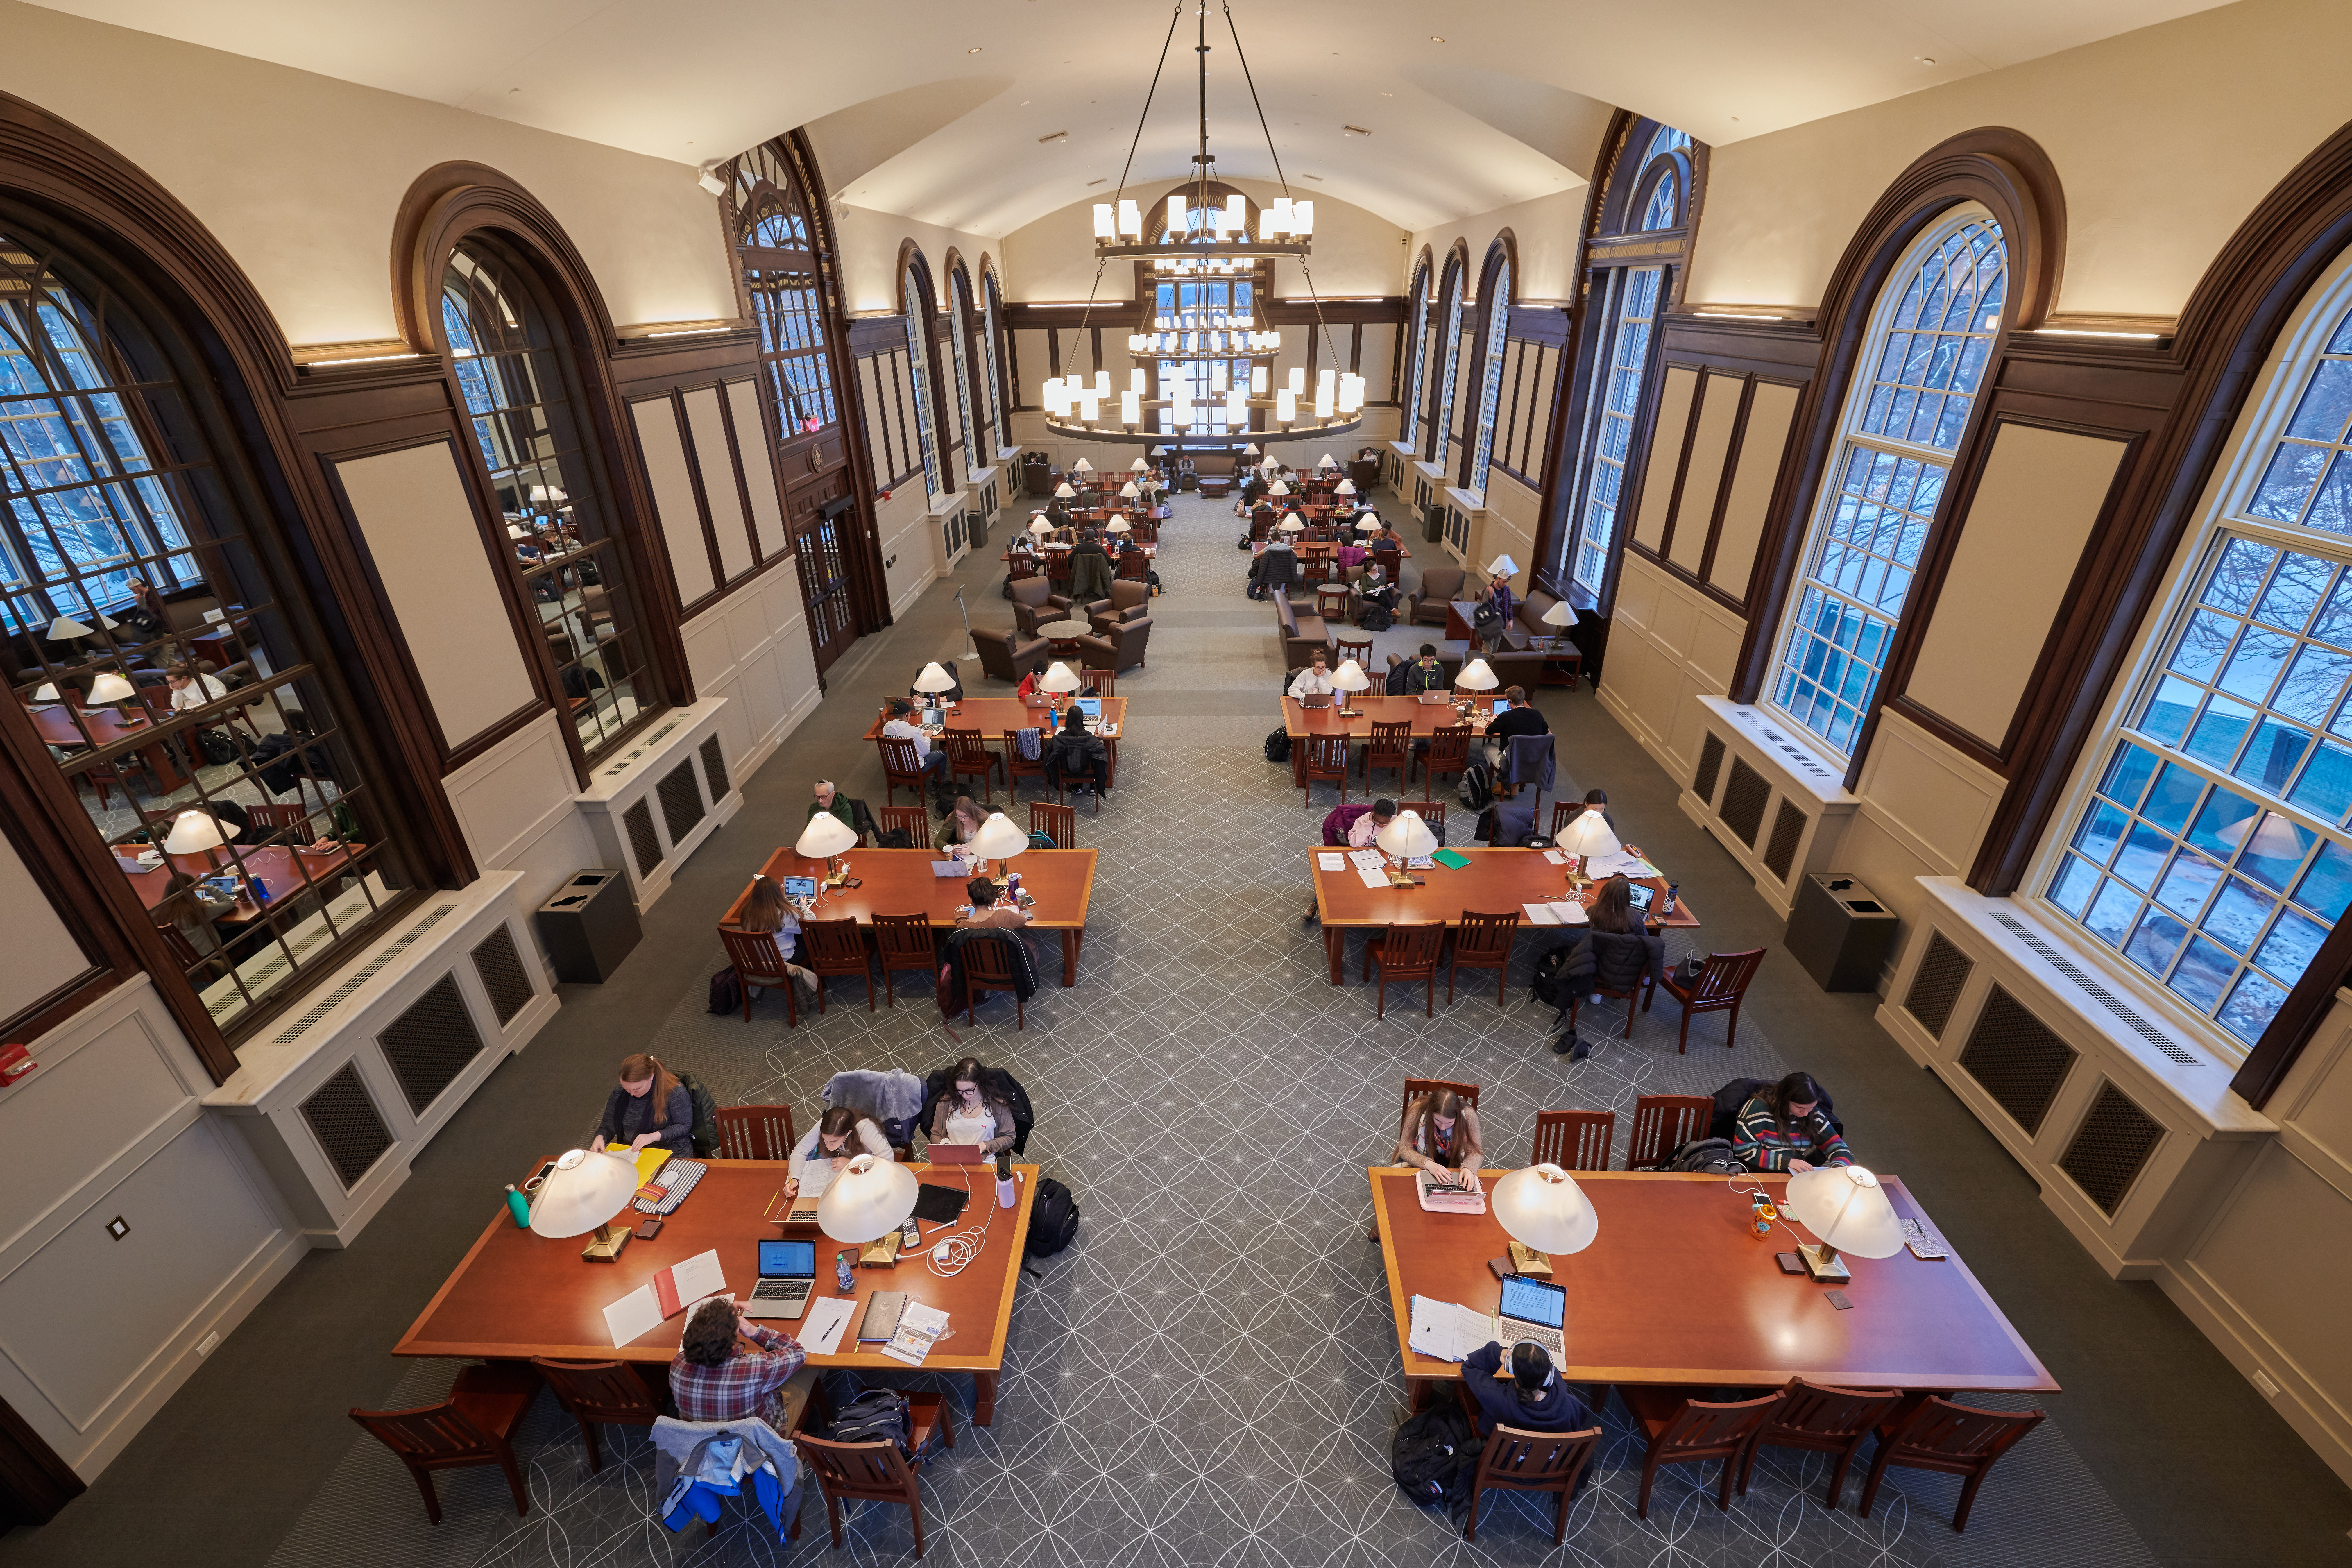 Students studying at the Wilbur Cross South Reading Room